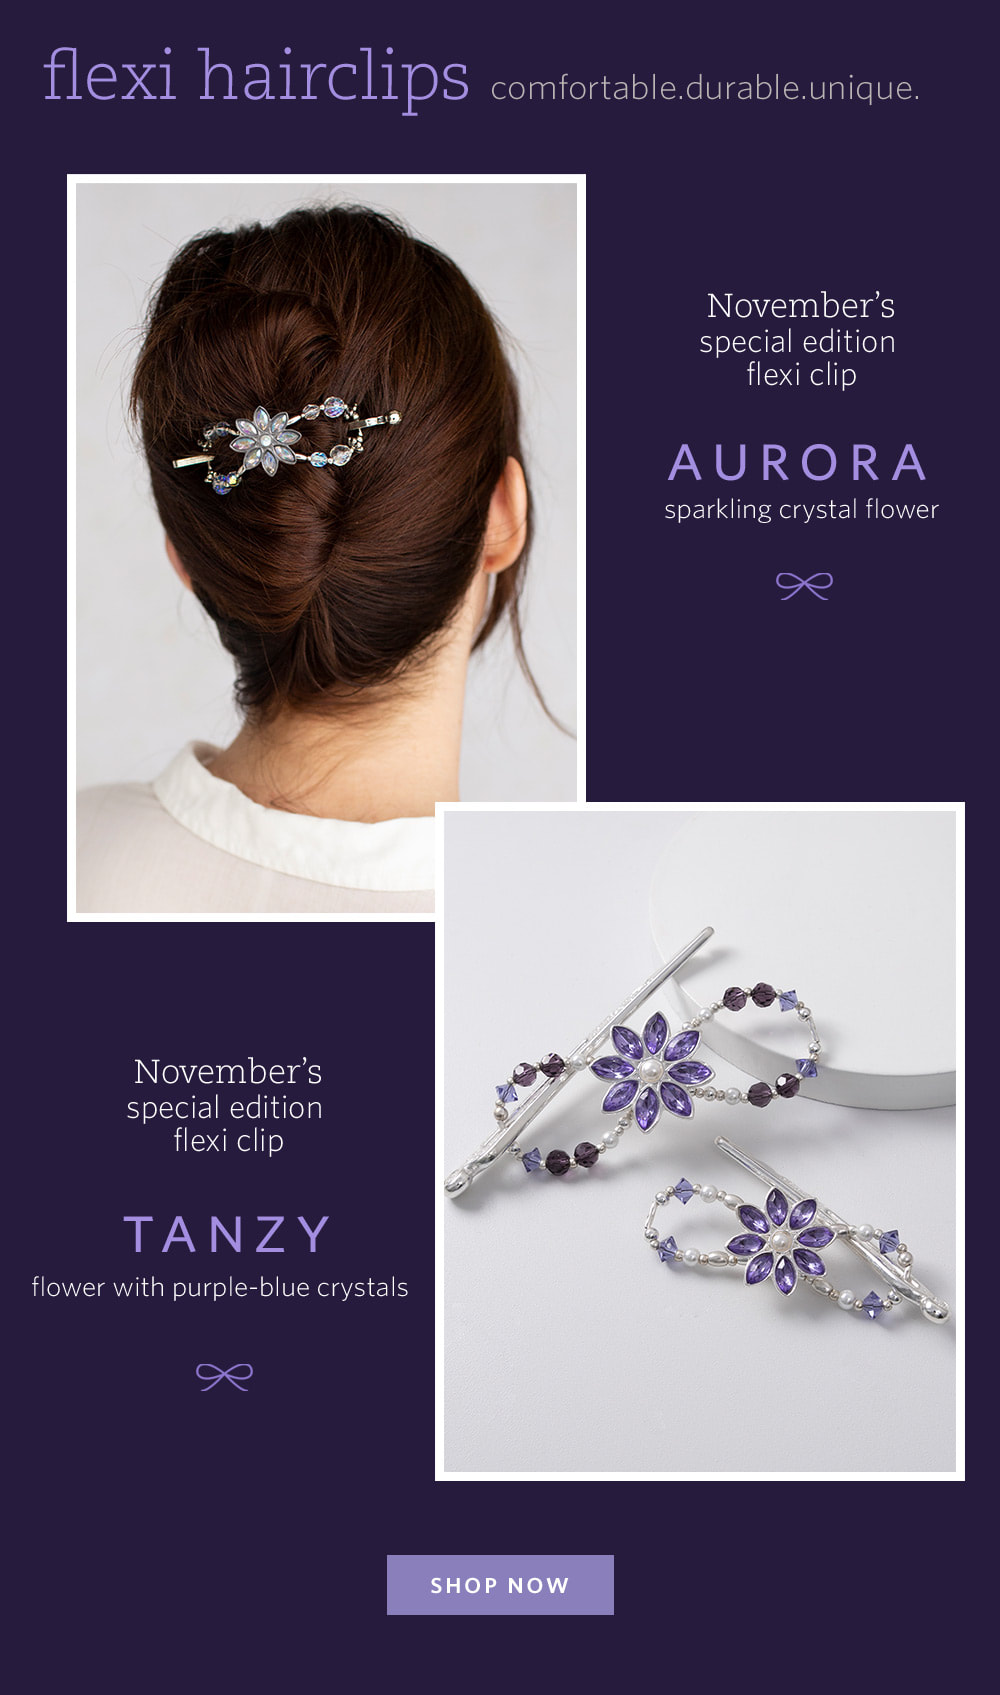 AURORA - Crystal aurora borealis flower shimmers and shines. November '19 Flexi-of-the-month available thru the month of November or while supplies last.